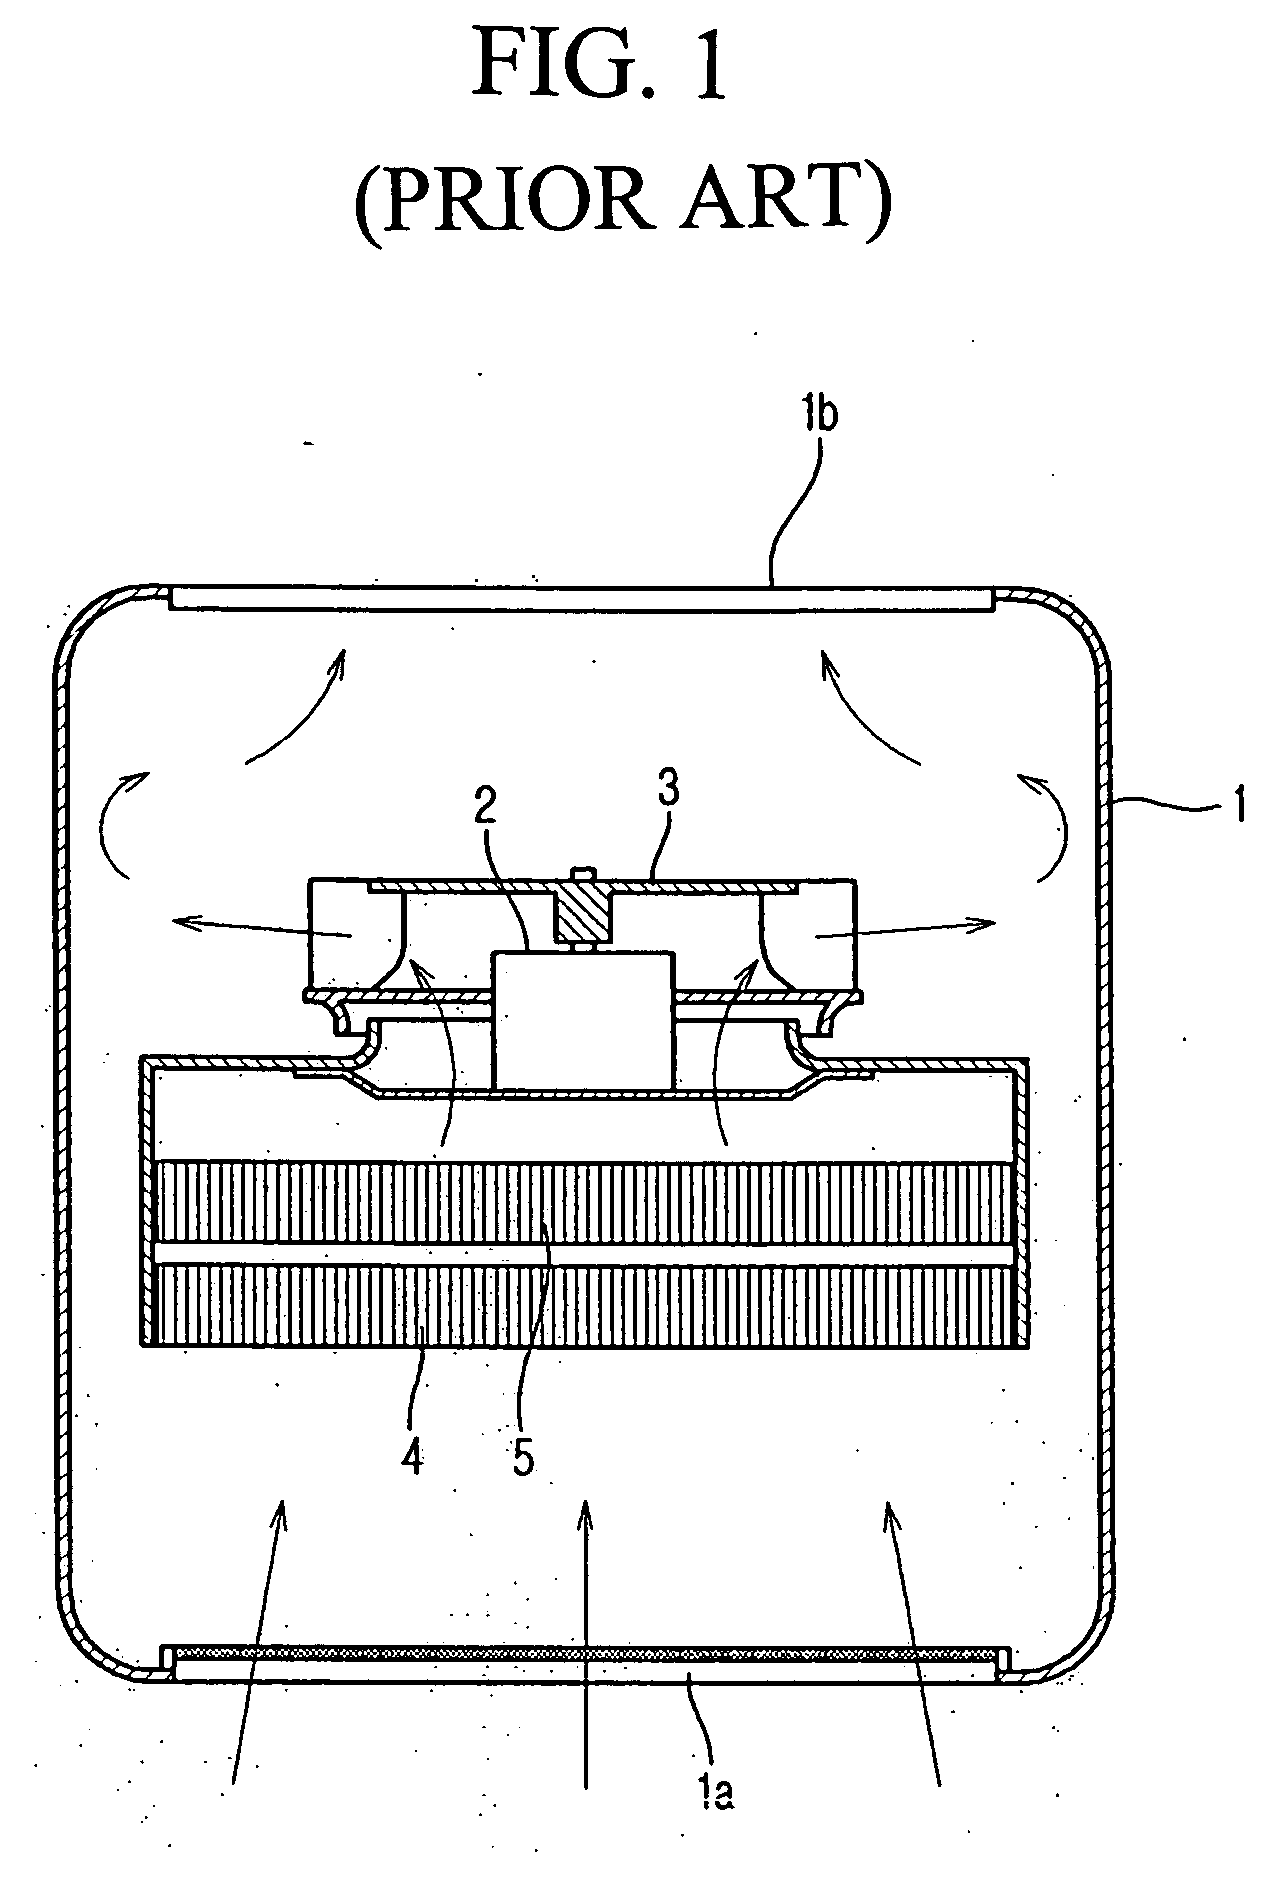 Dehumidifier and centrifugal blower thereof